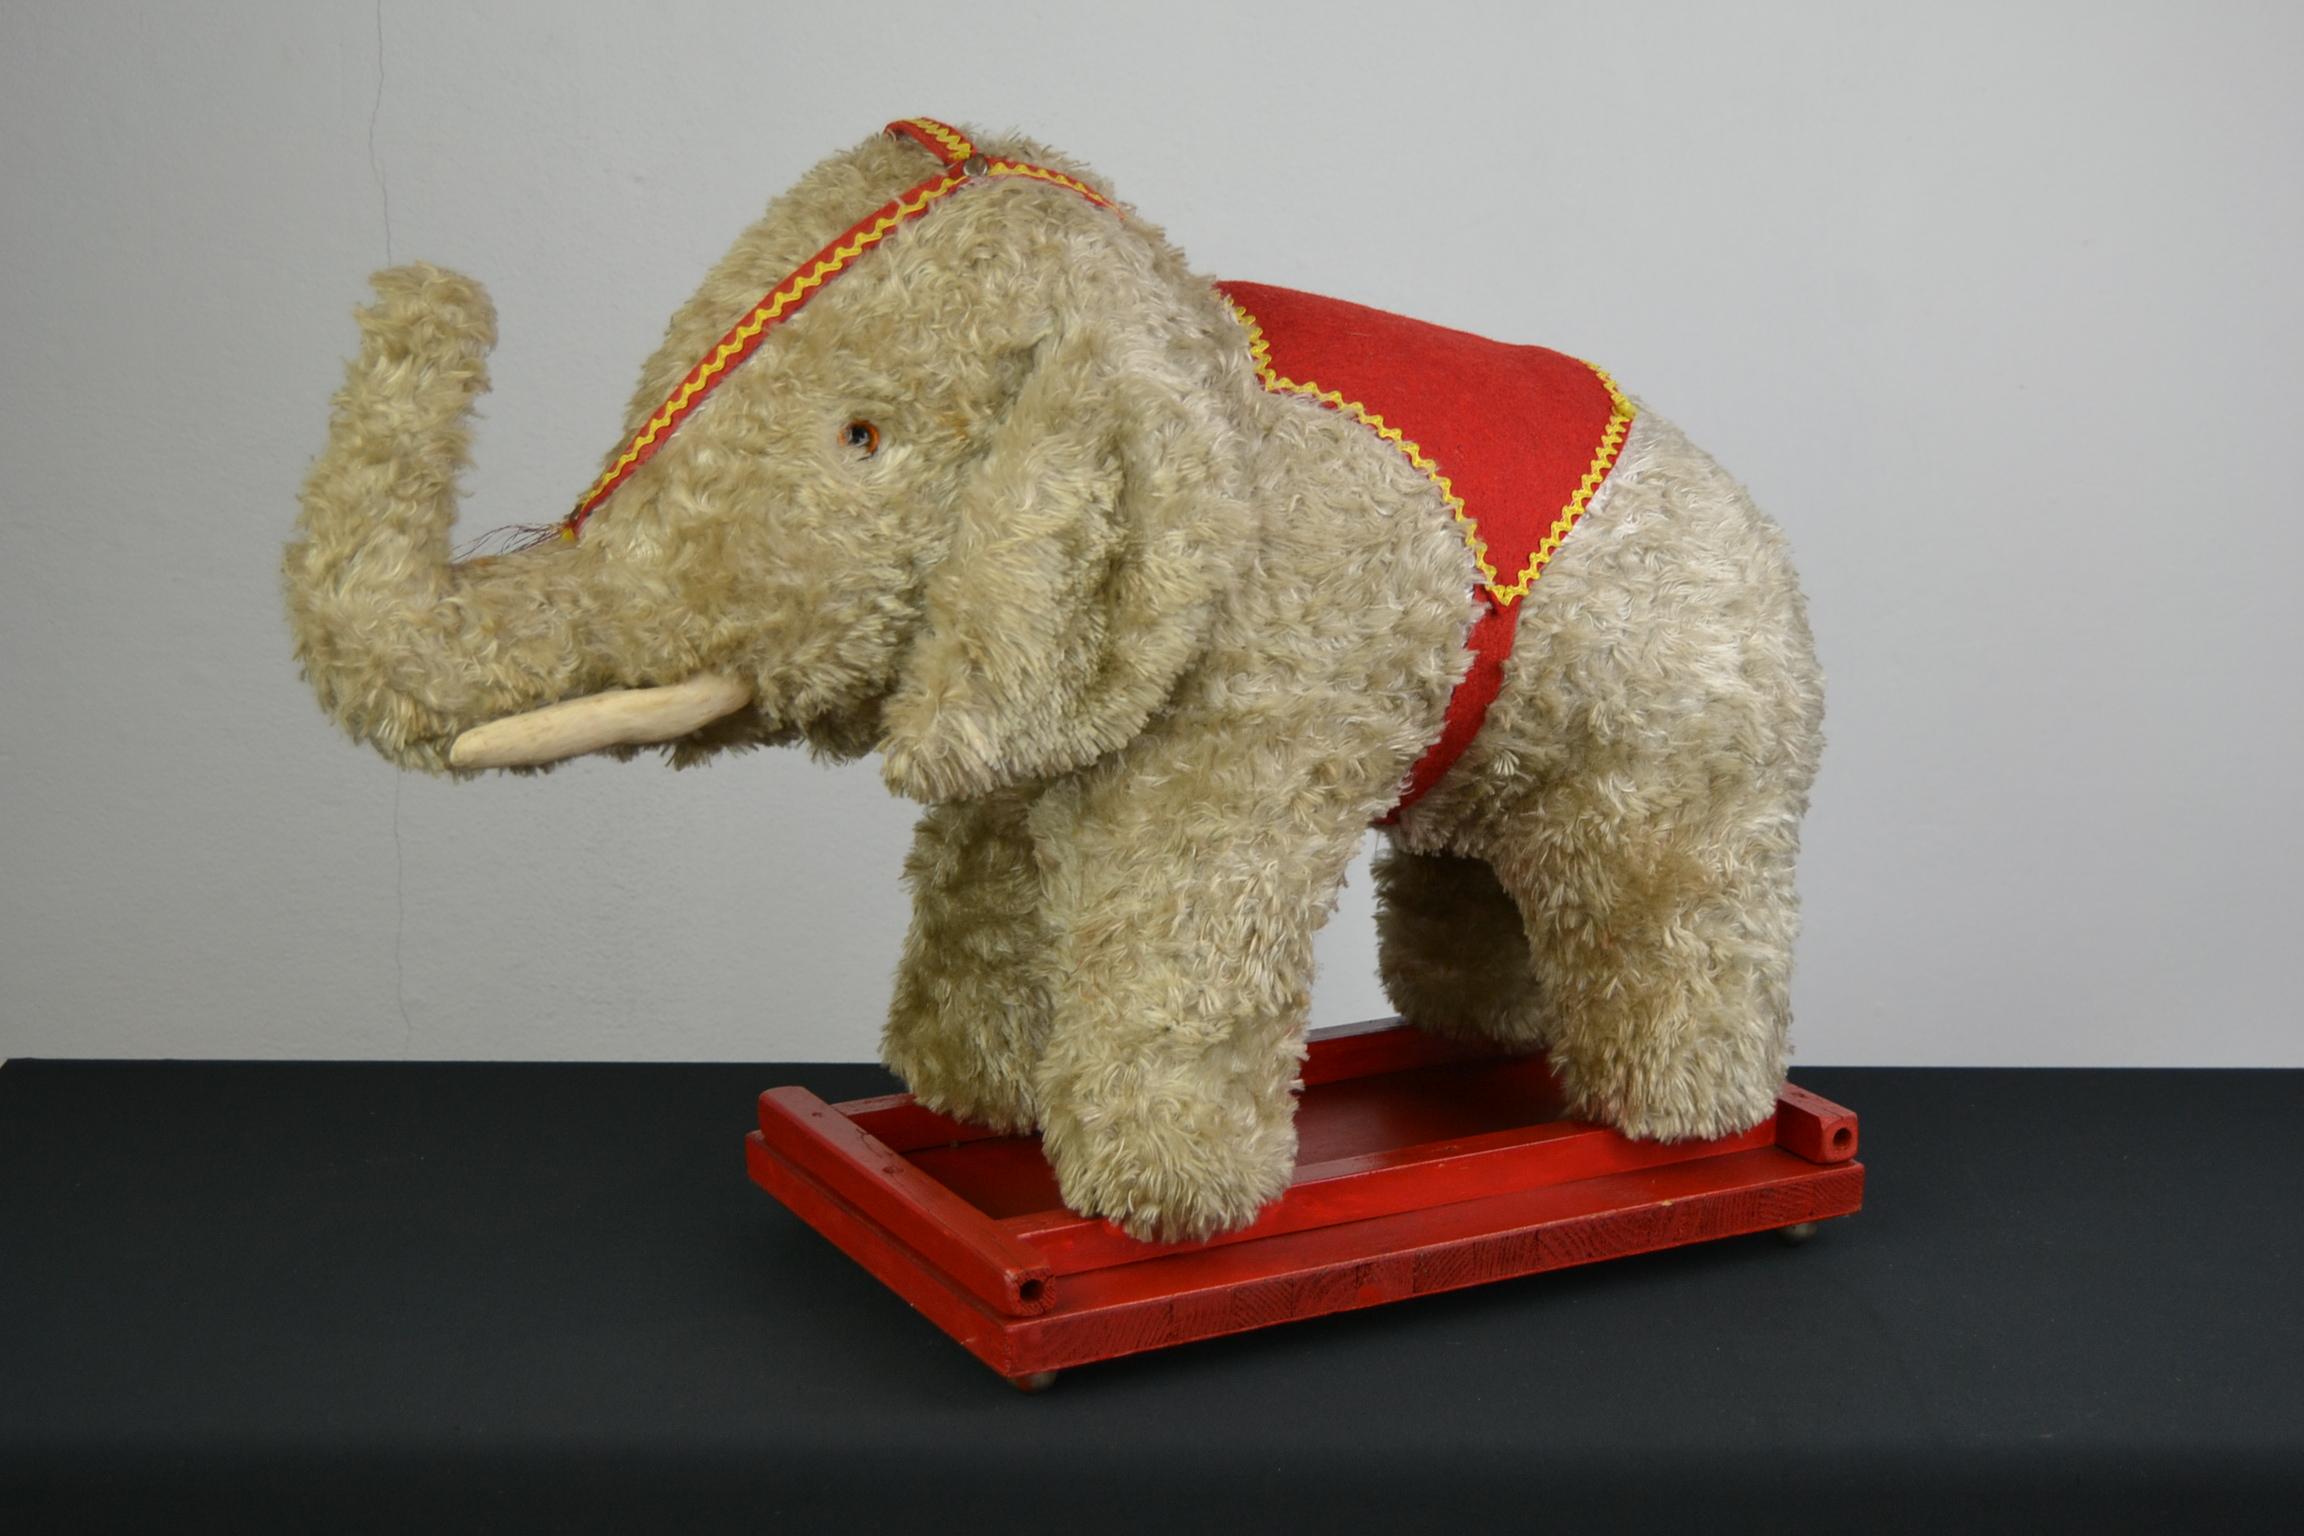 Vintage Stuffed Elephant Toy on Wooden Cart with Wheels, 1960s For Sale 7